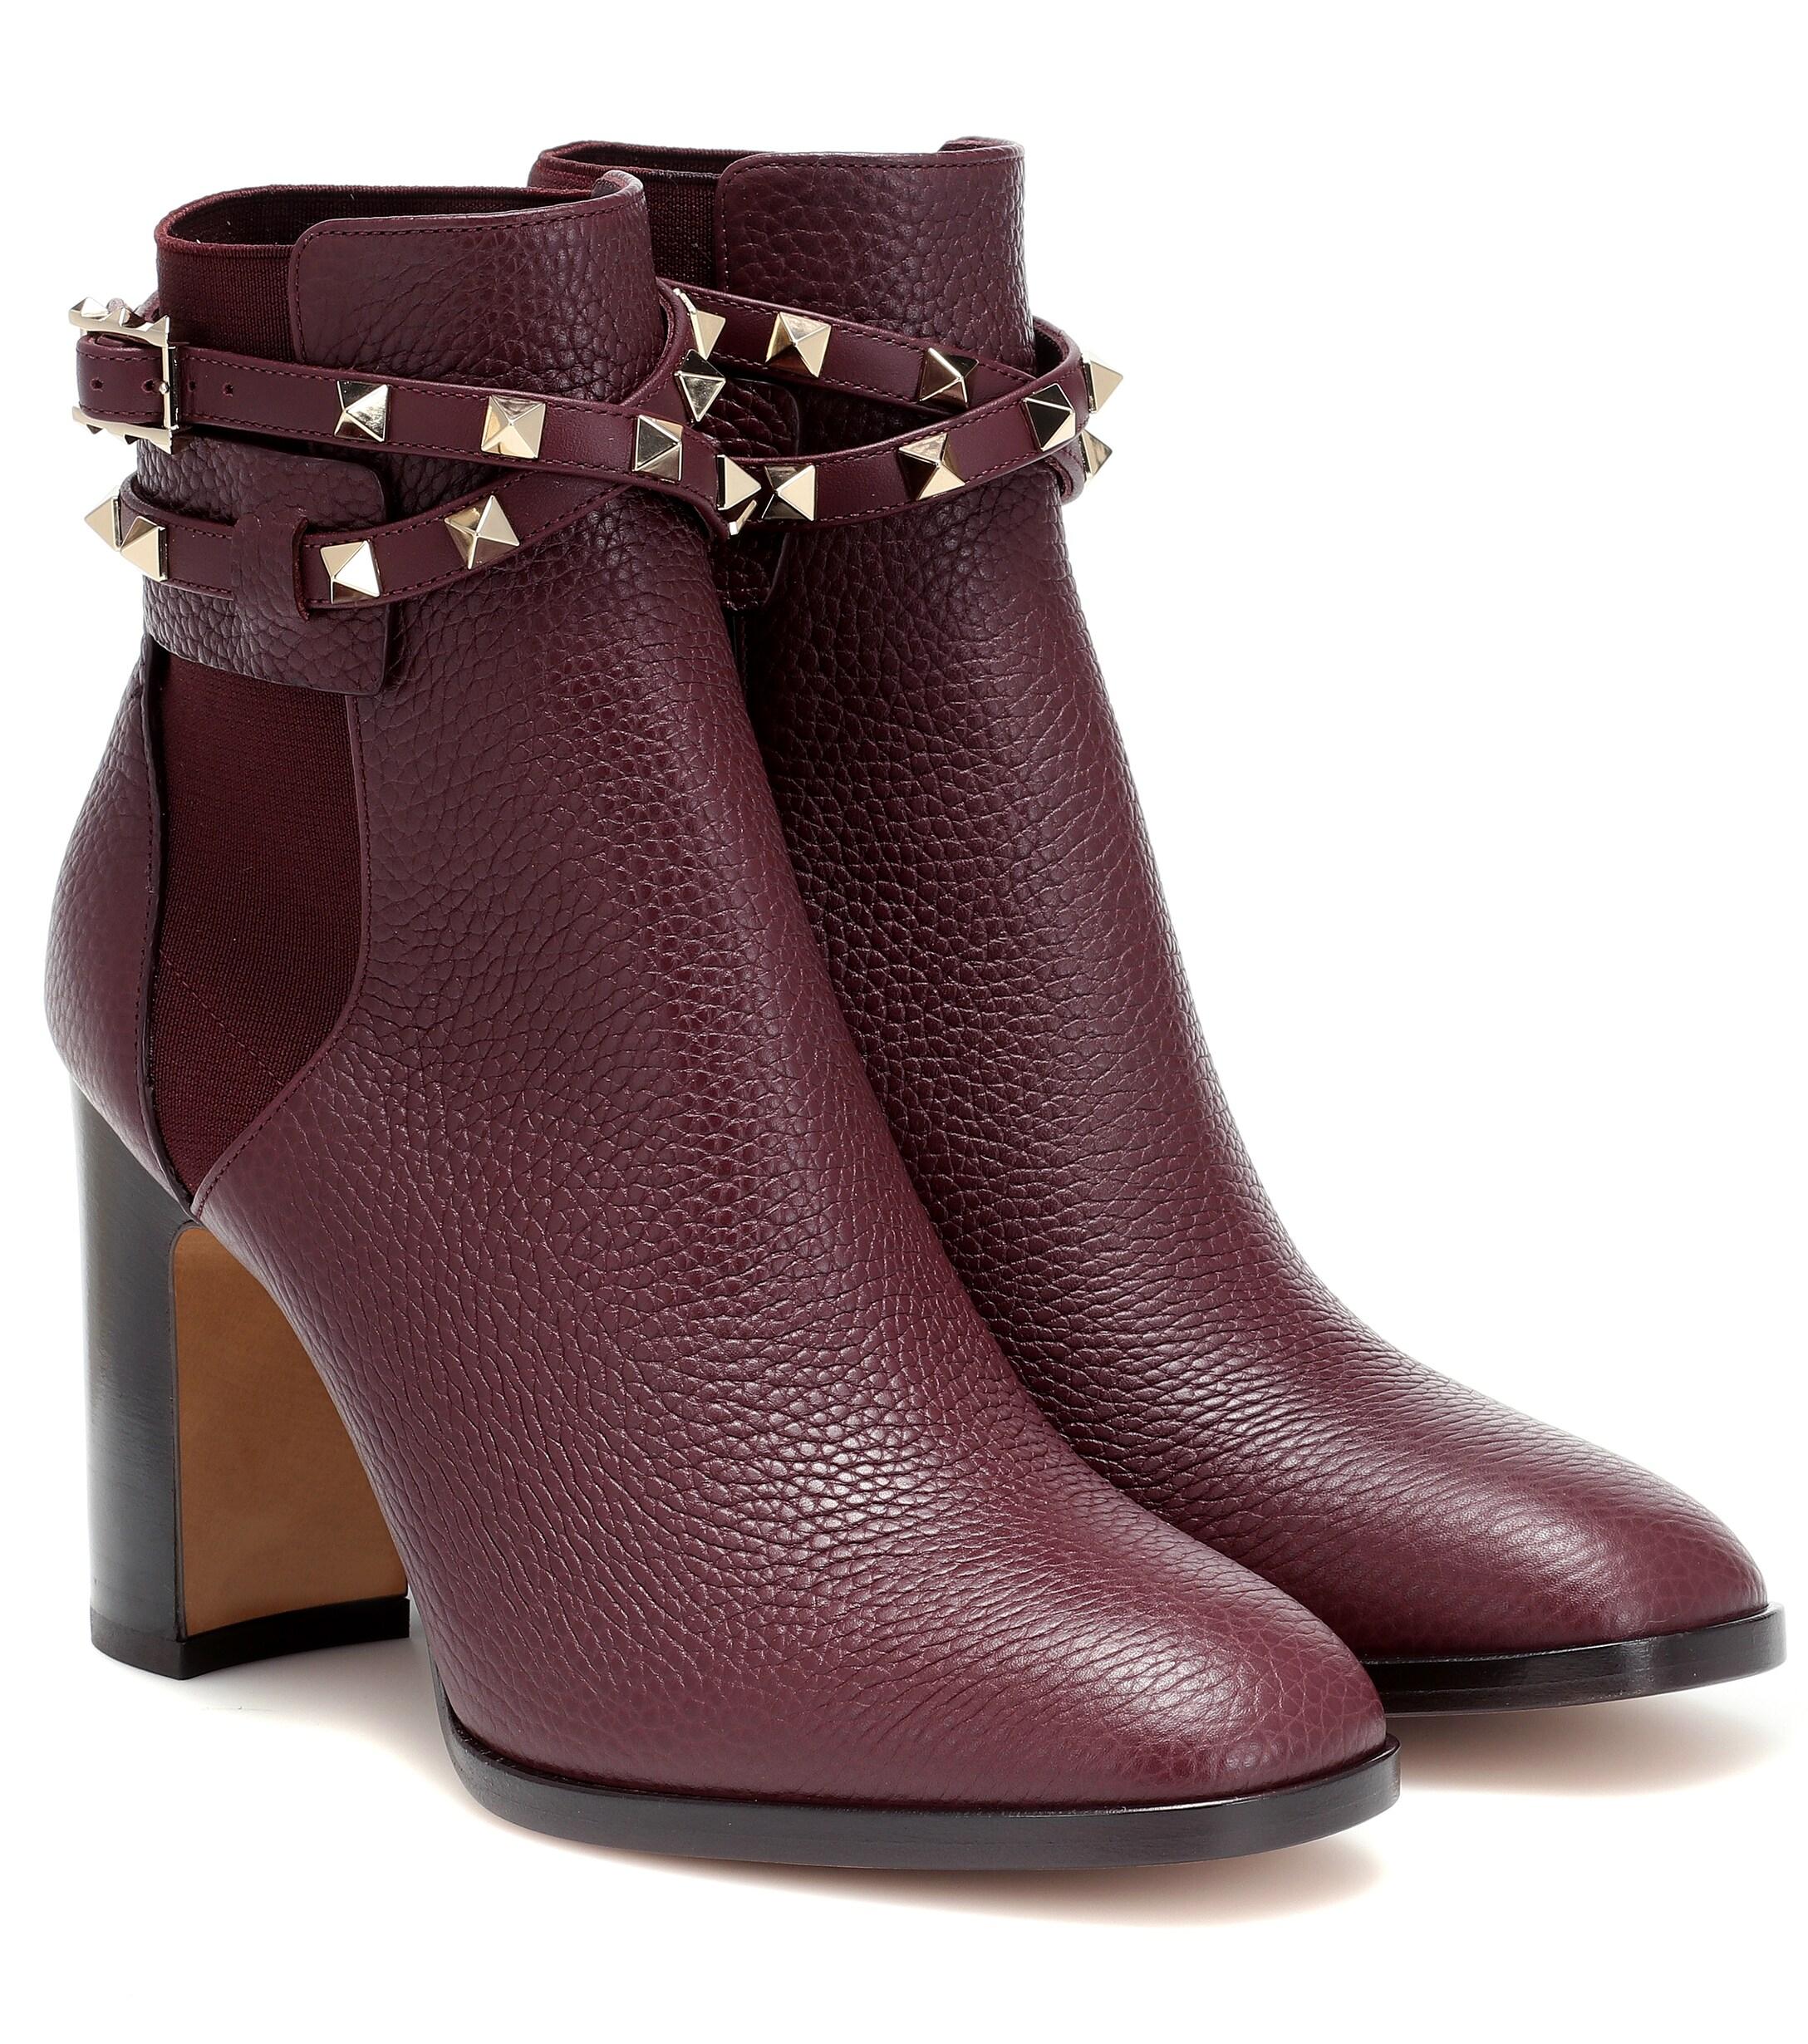 Valentino Rockstud Leather Ankle Boots in Purple - Lyst